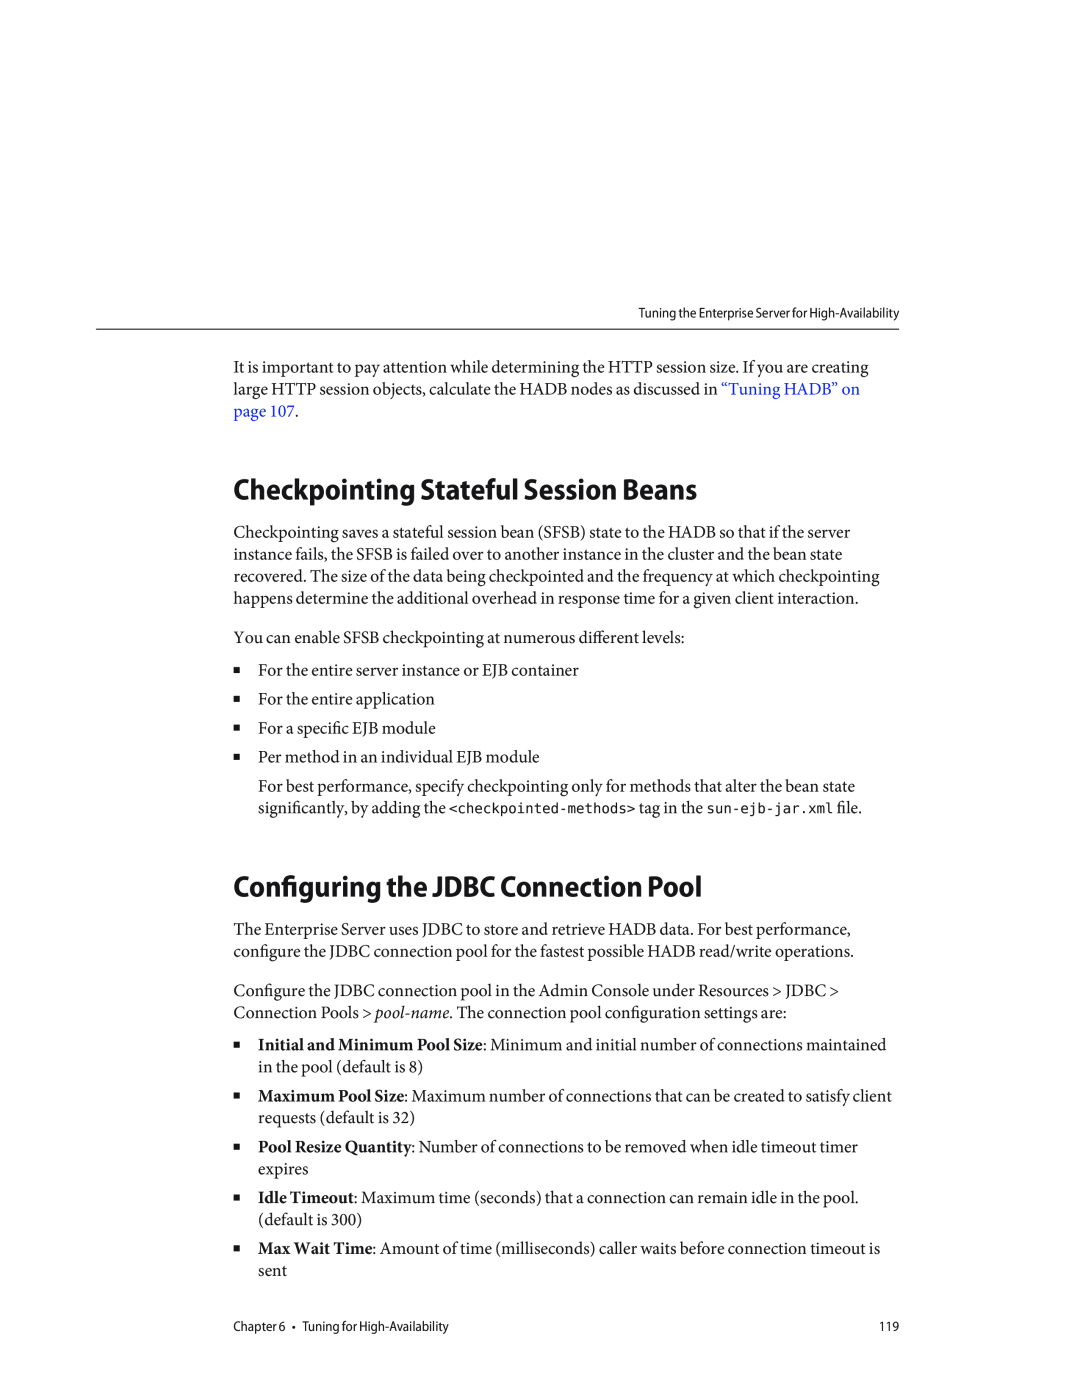 Sun Microsystems 820434310 manual Checkpointing Stateful Session Beans, Configuring the JDBC Connection Pool 